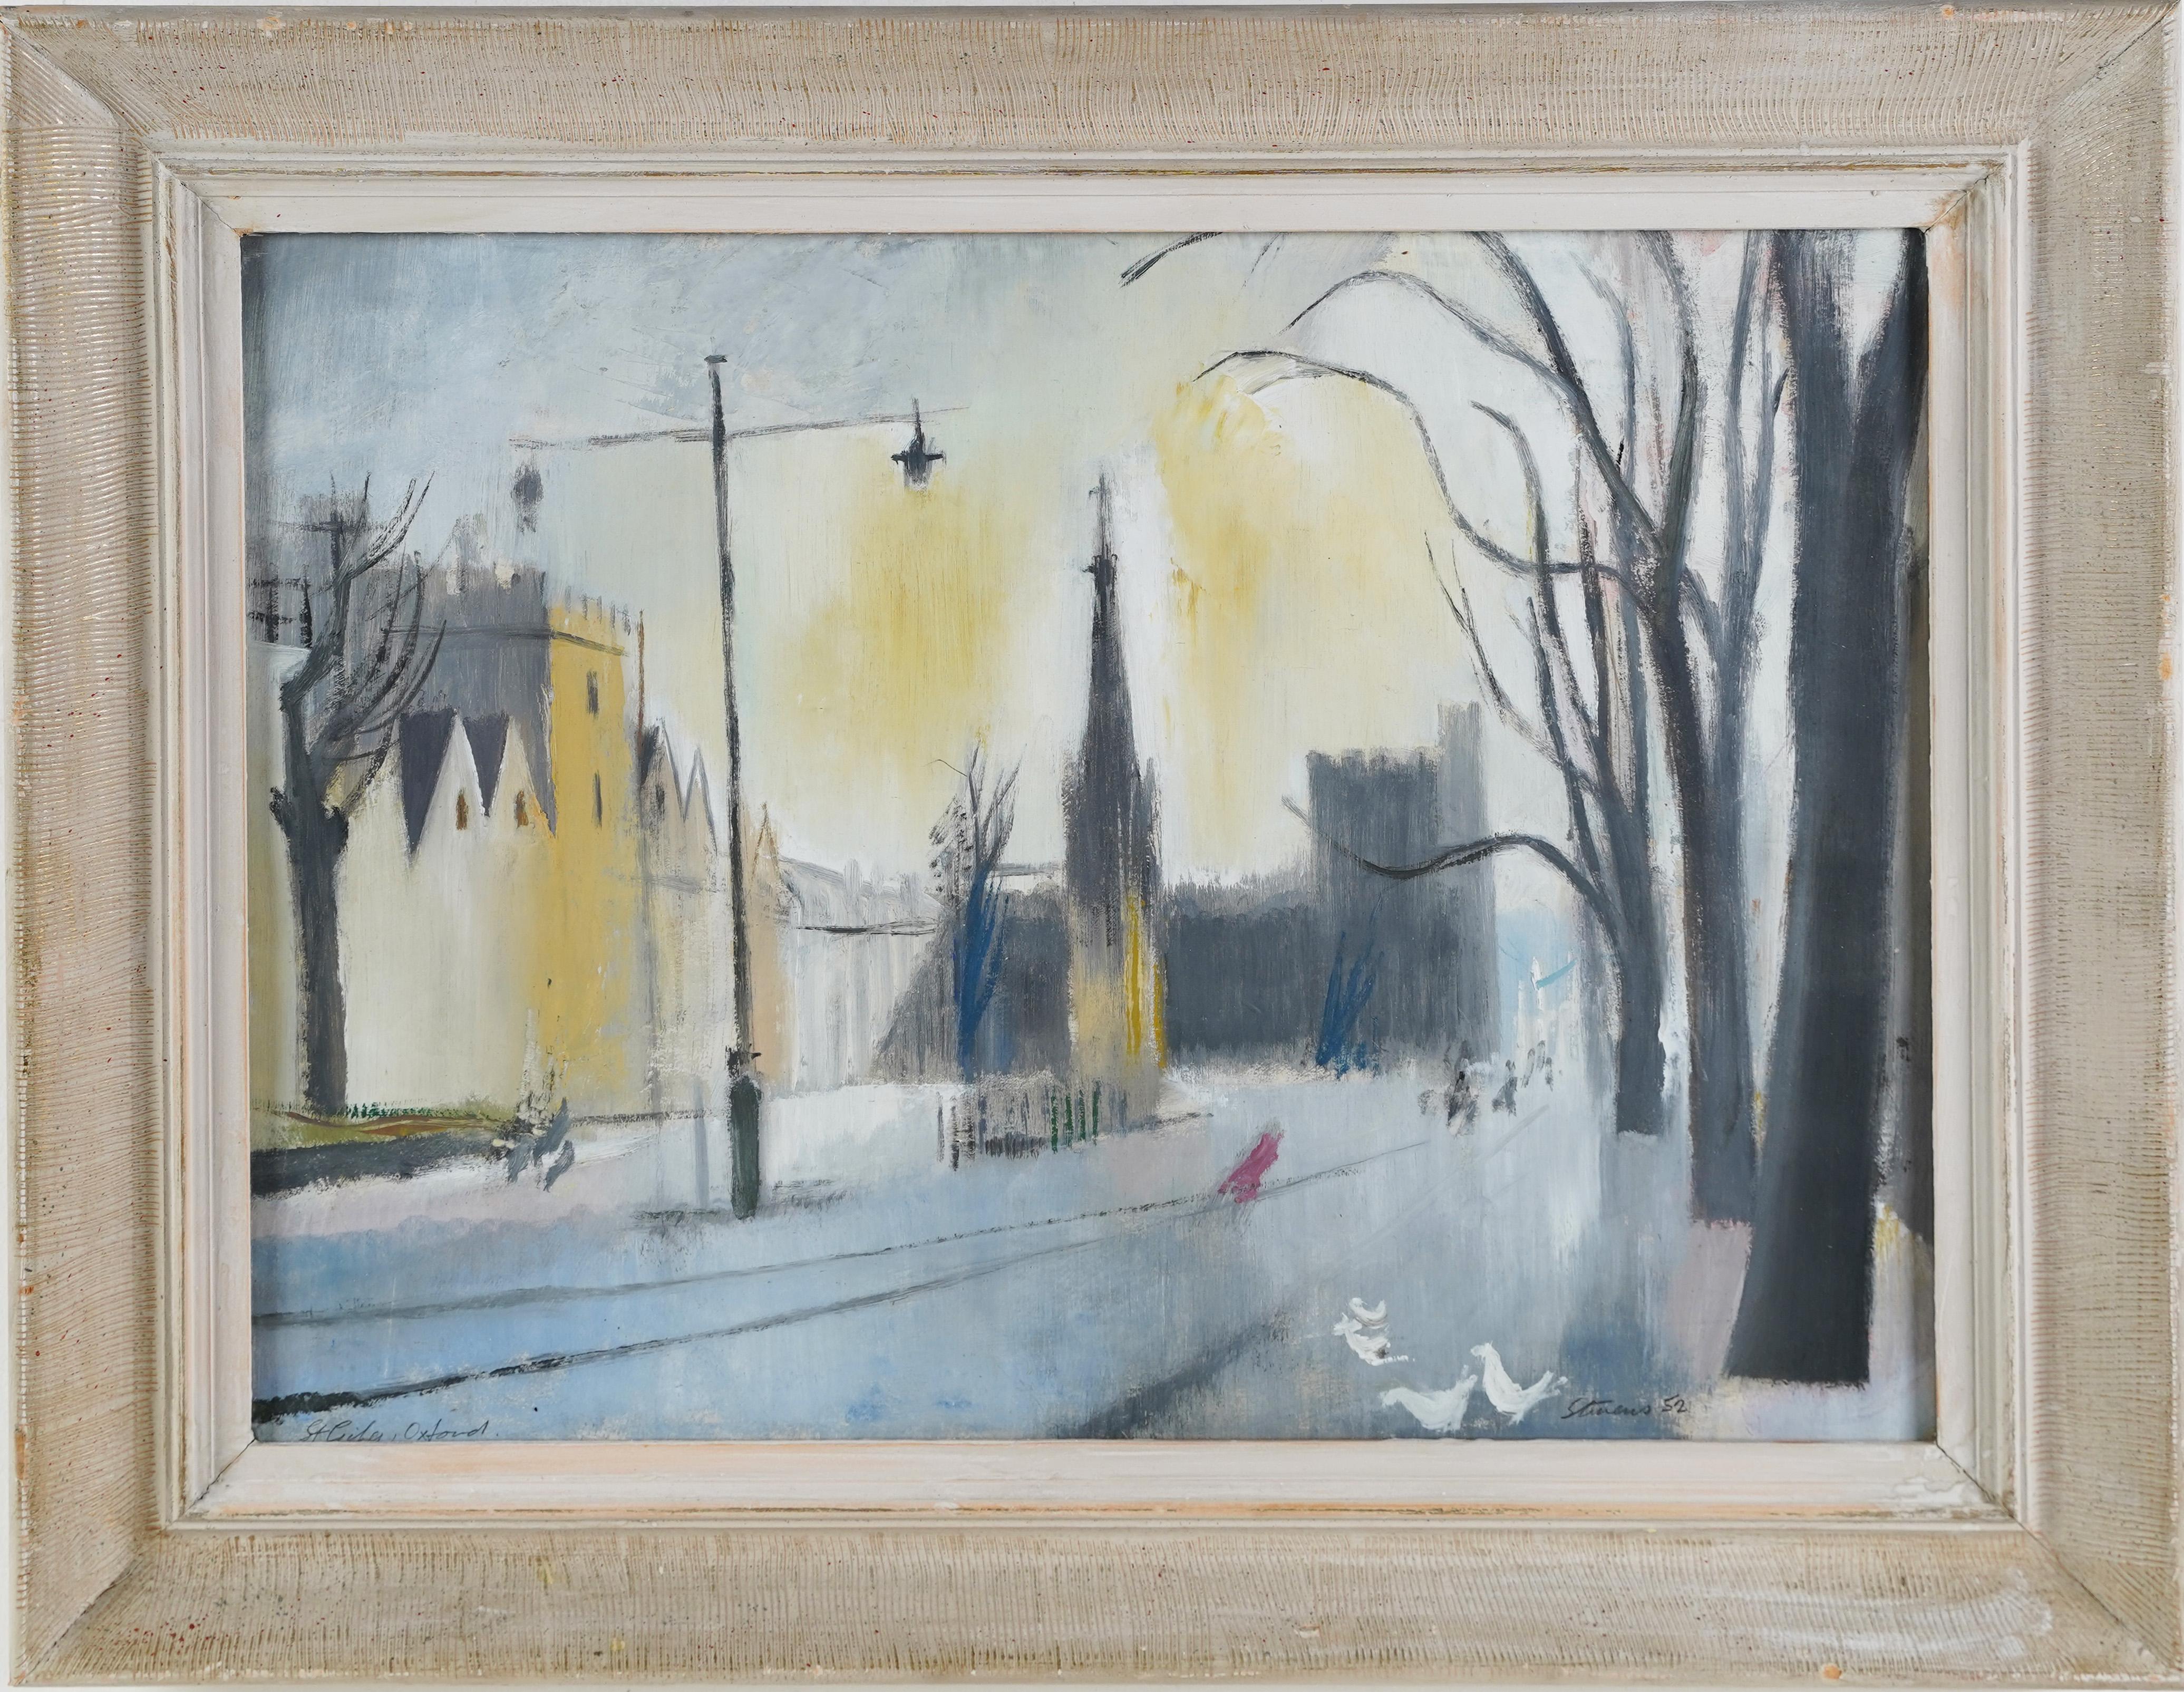  Antique American School Signed Modernist Street Scene Rare Framed Oil Painting - Gray Abstract Painting by Unknown